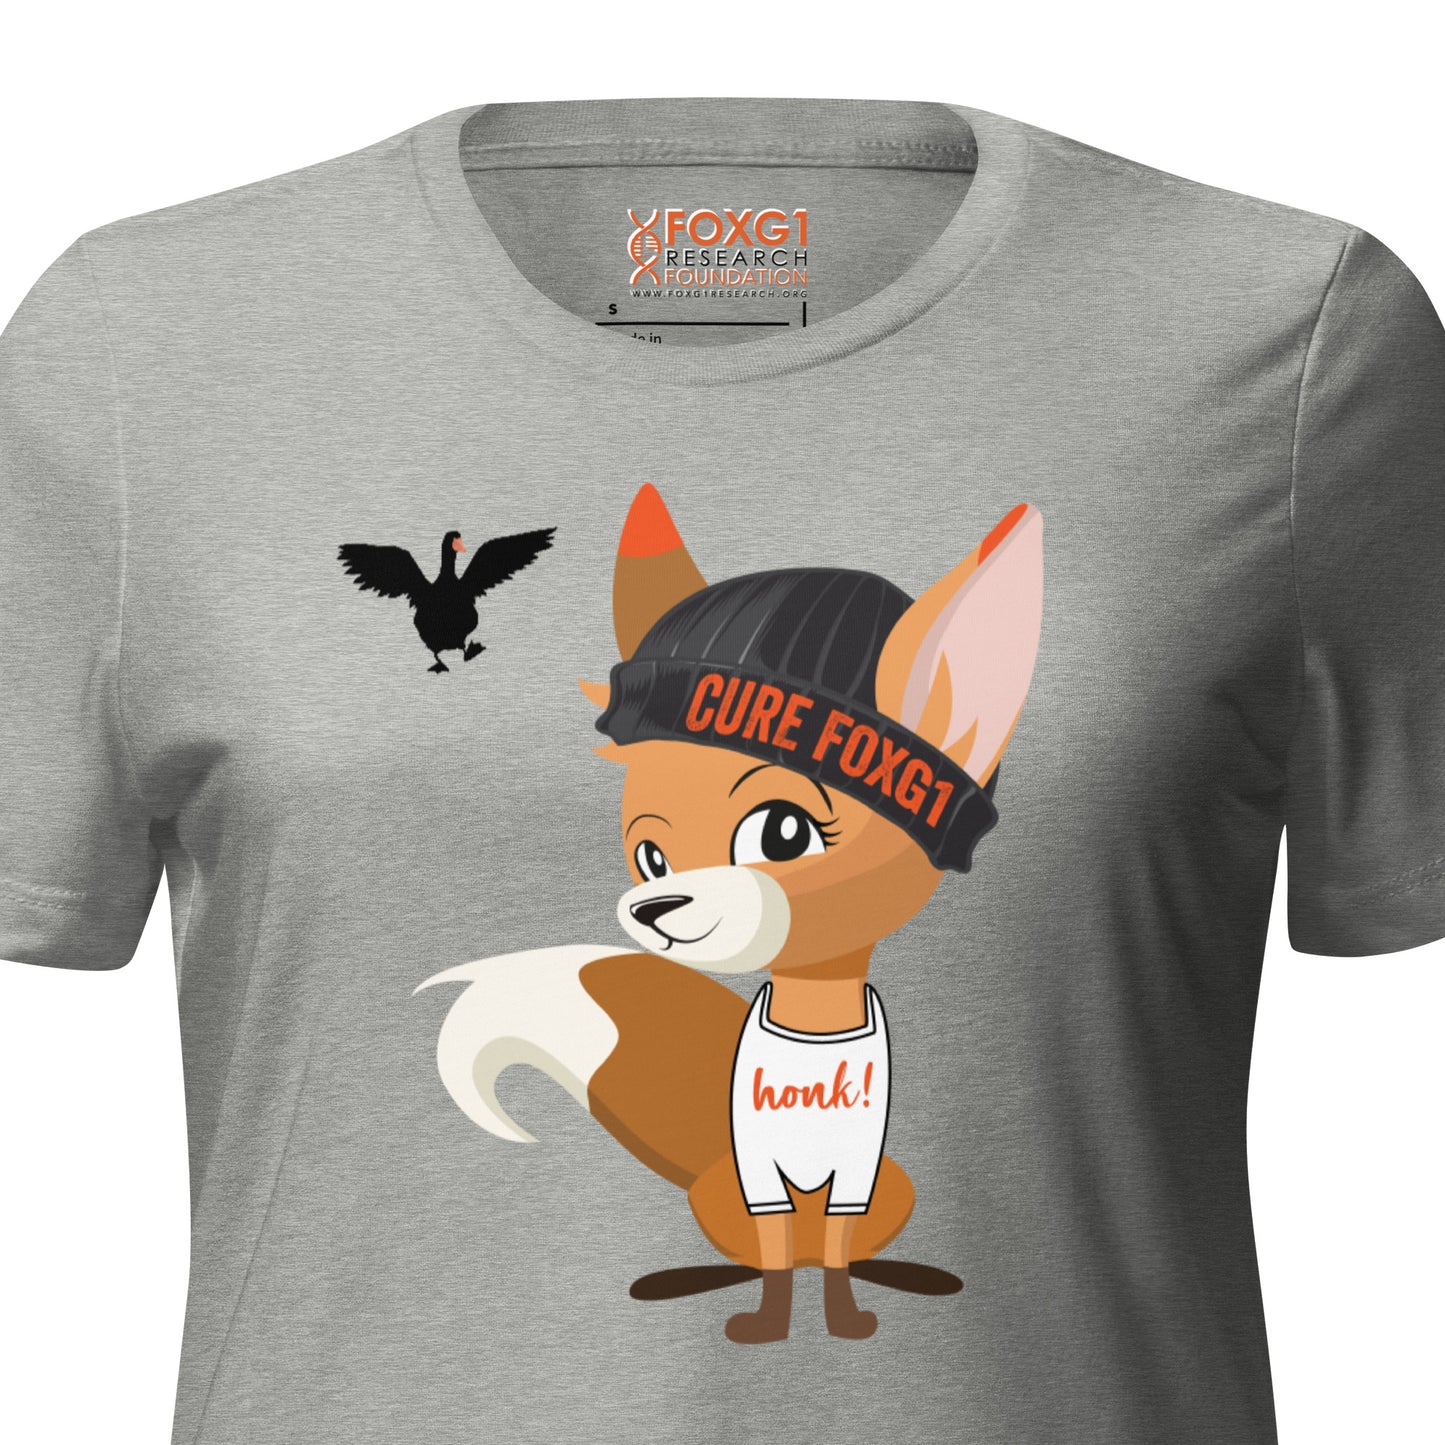 Honk for a Cure with Frankie! Women’s relaxed tri-blend t-shirt